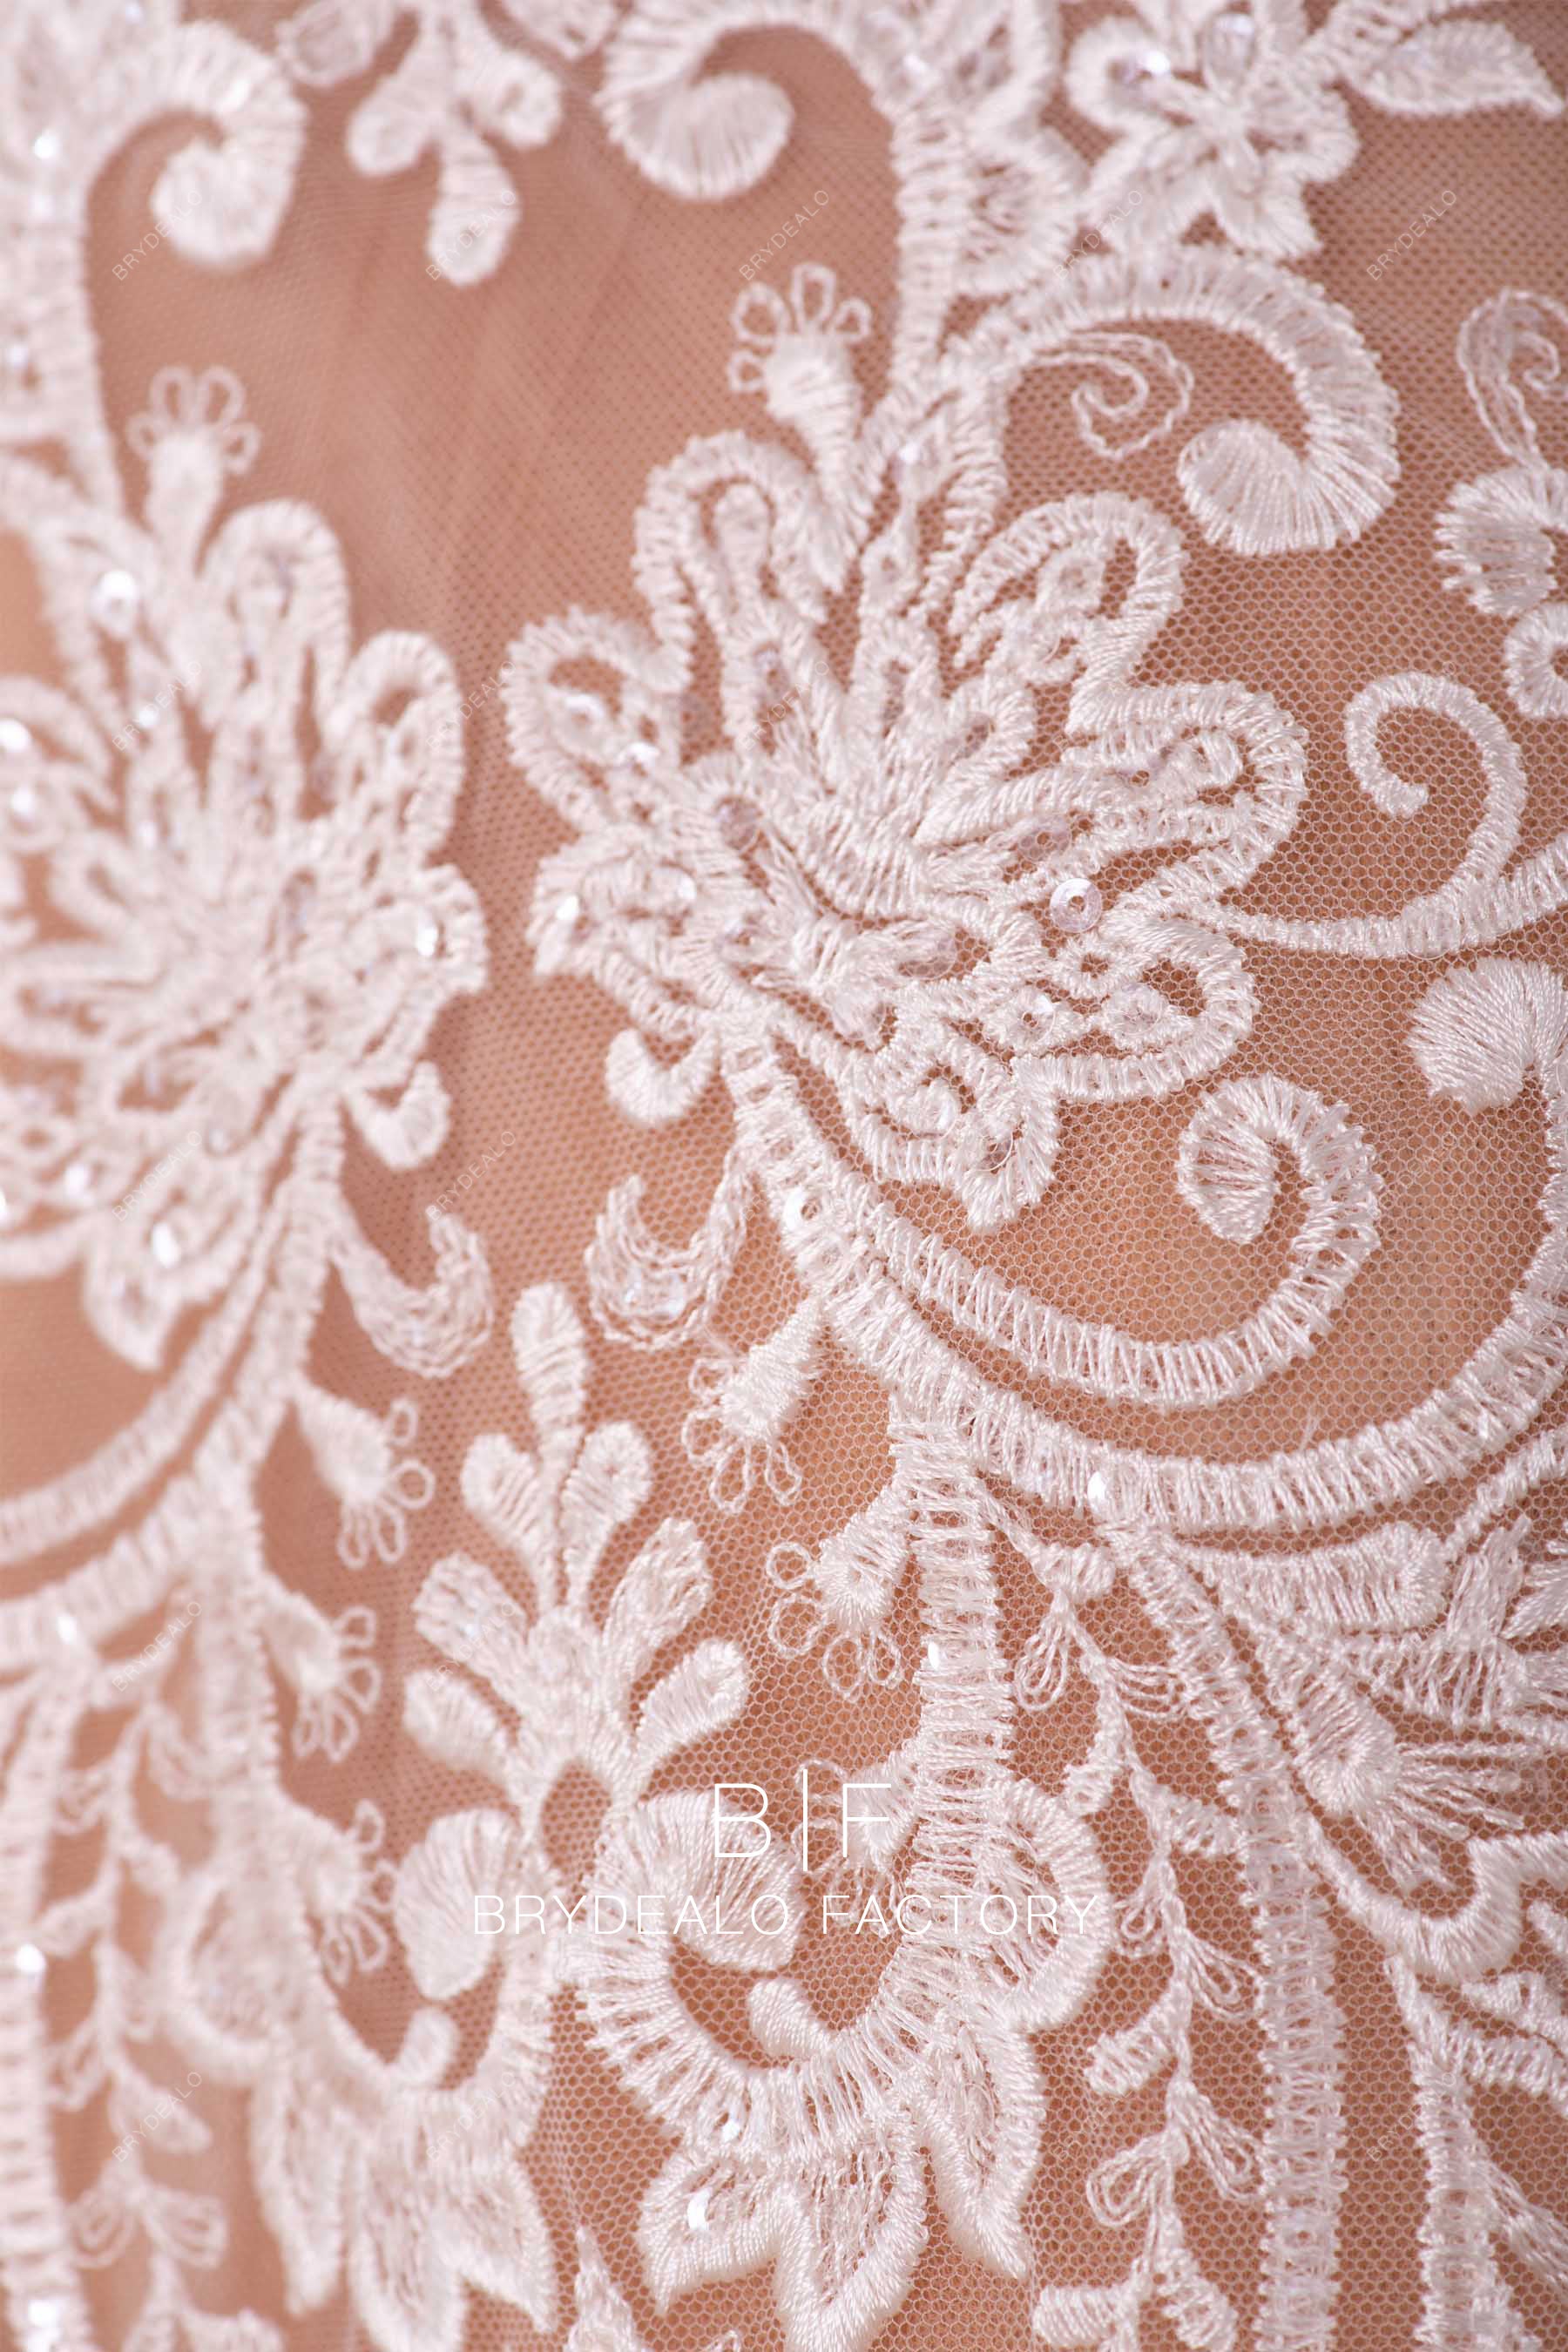 shimmery lace fabric